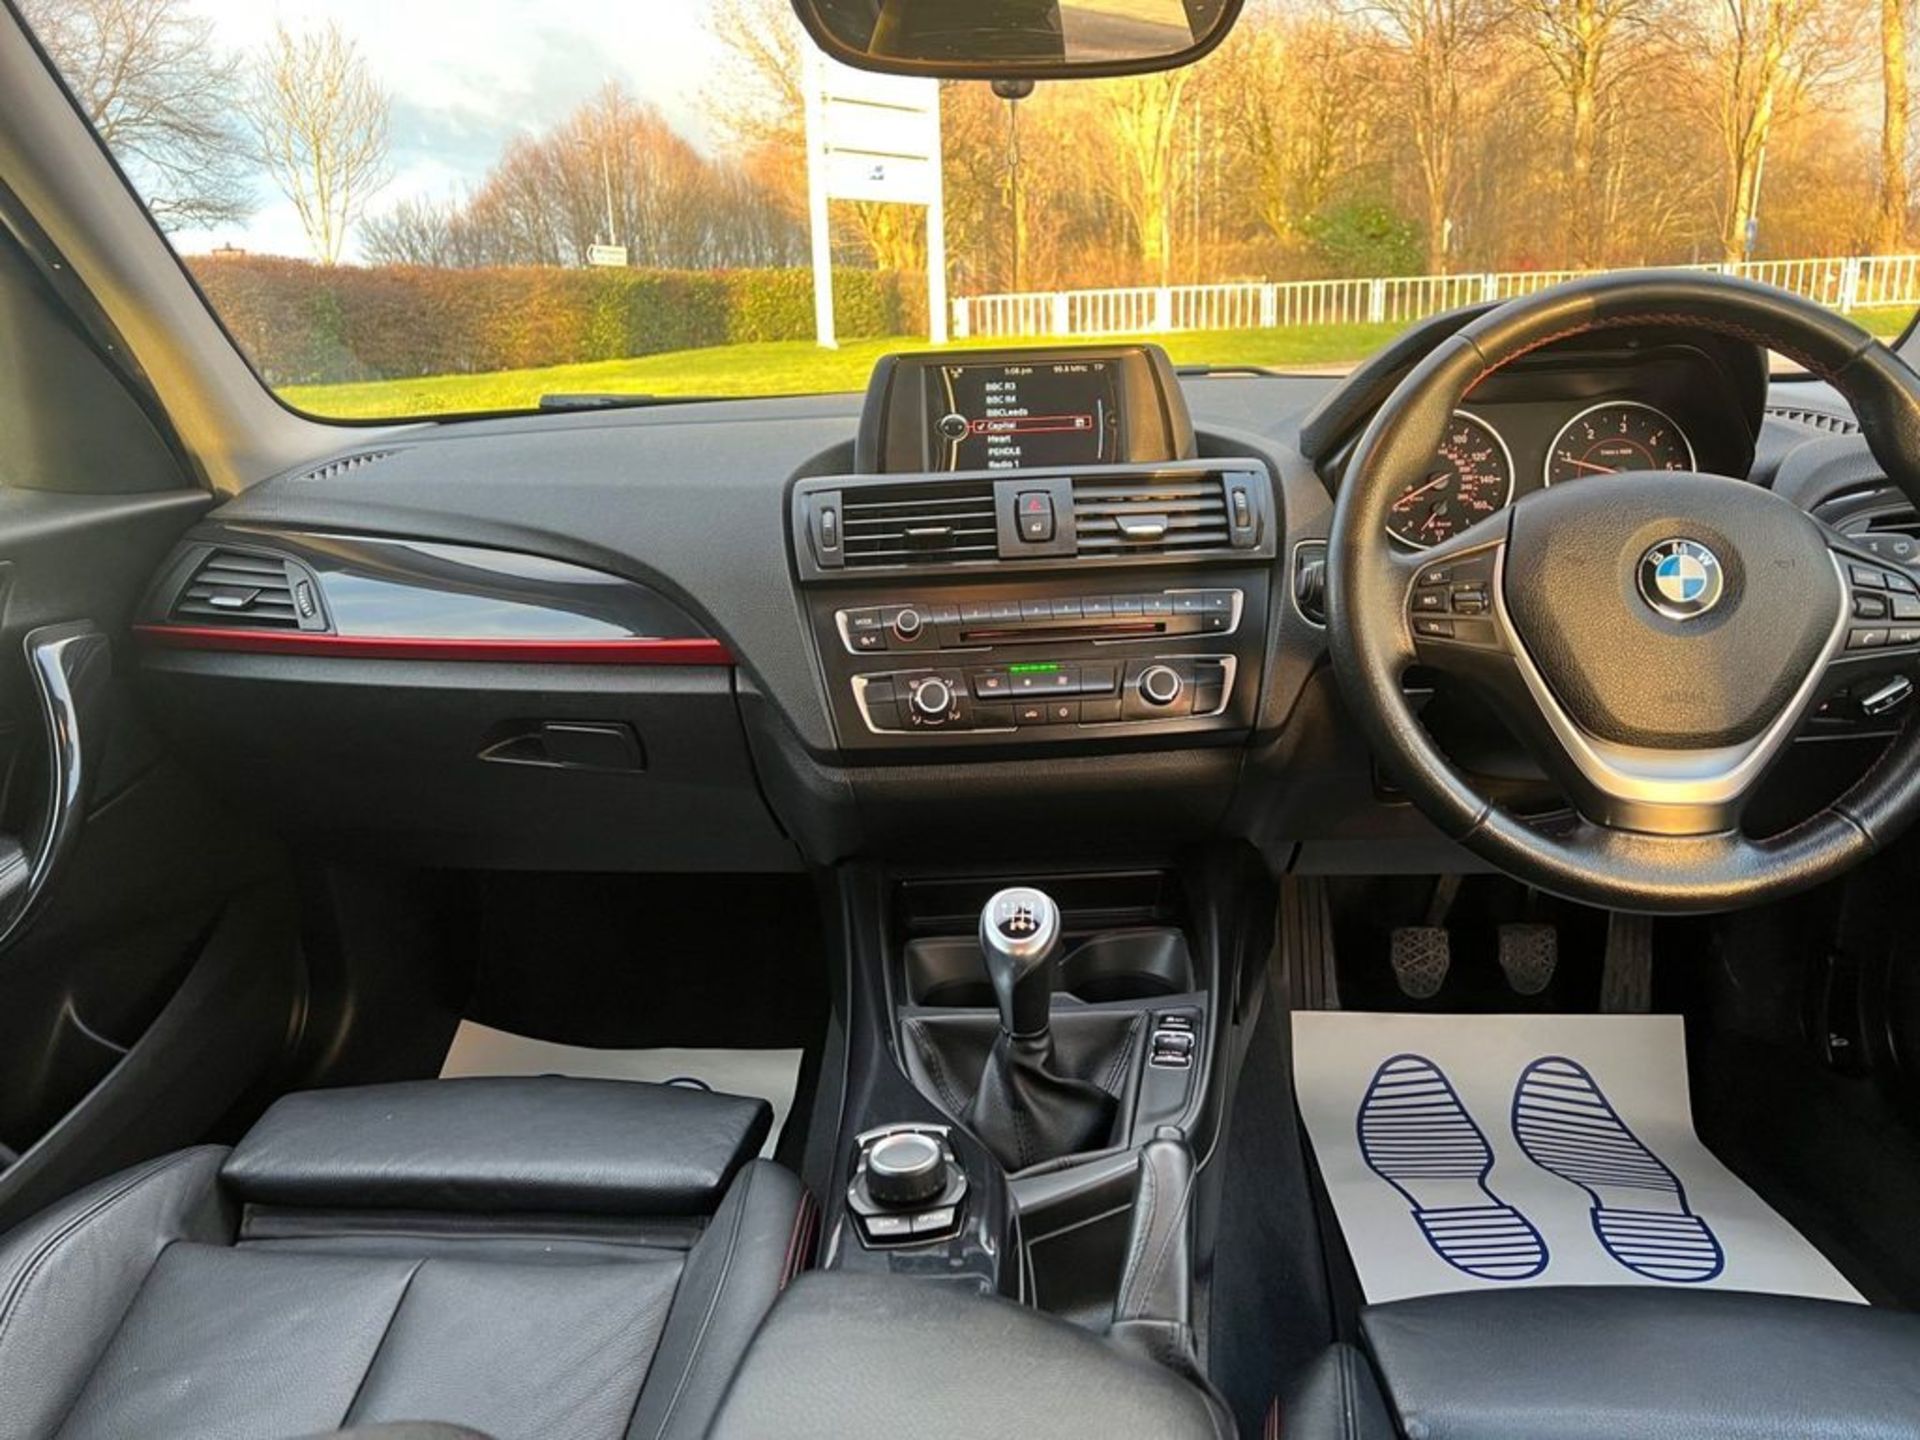 BMW 1 SERIES 2.0 116D SPORT EURO 5 (S/S) 5DR - Image 29 of 40